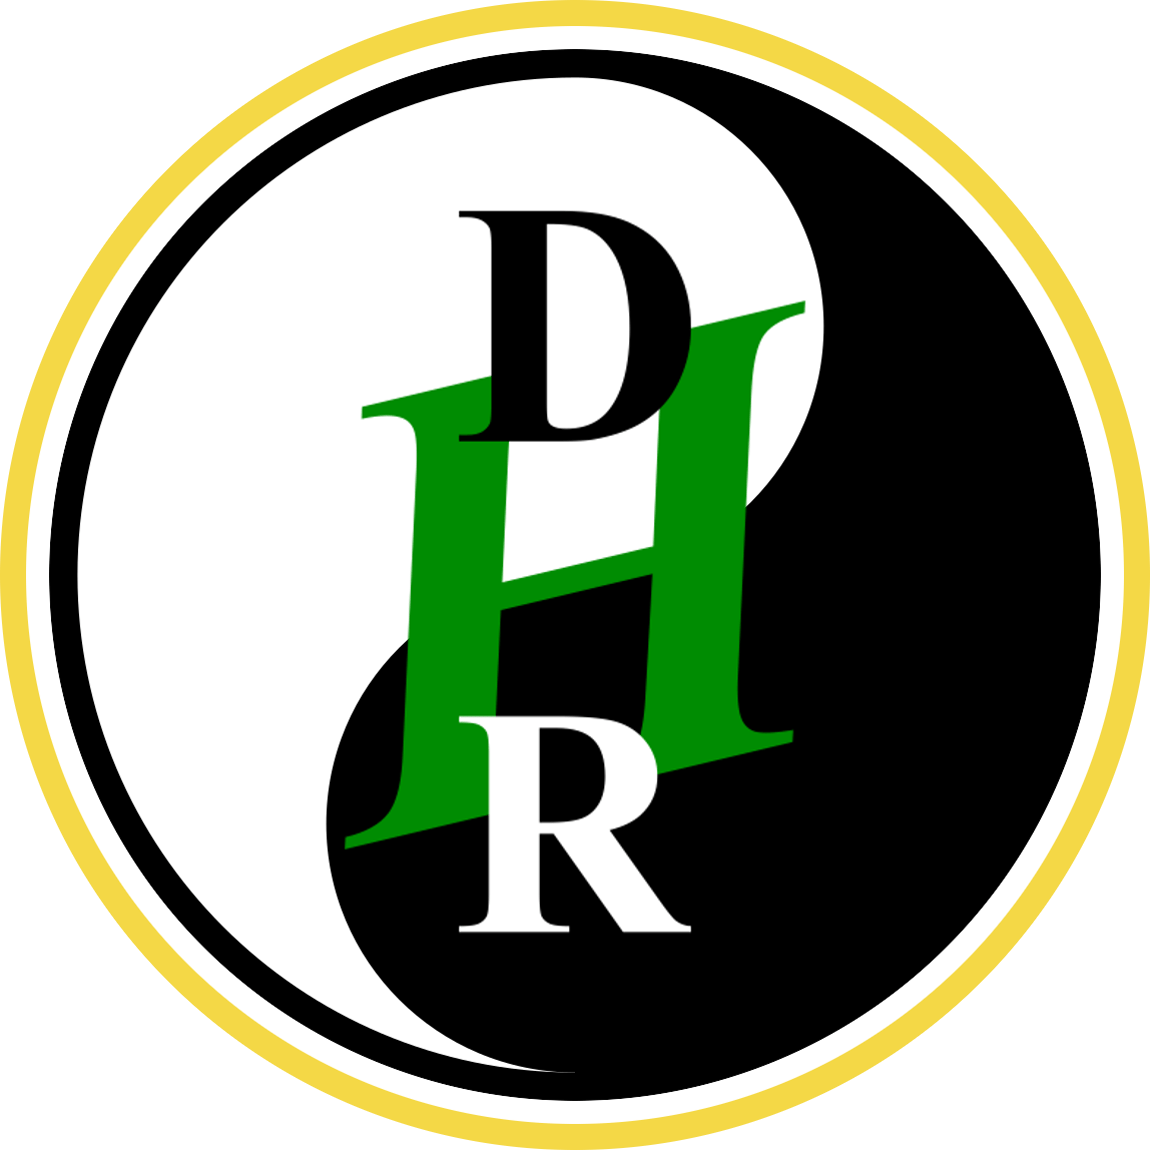 A Black And White Circle With Green And White Letters